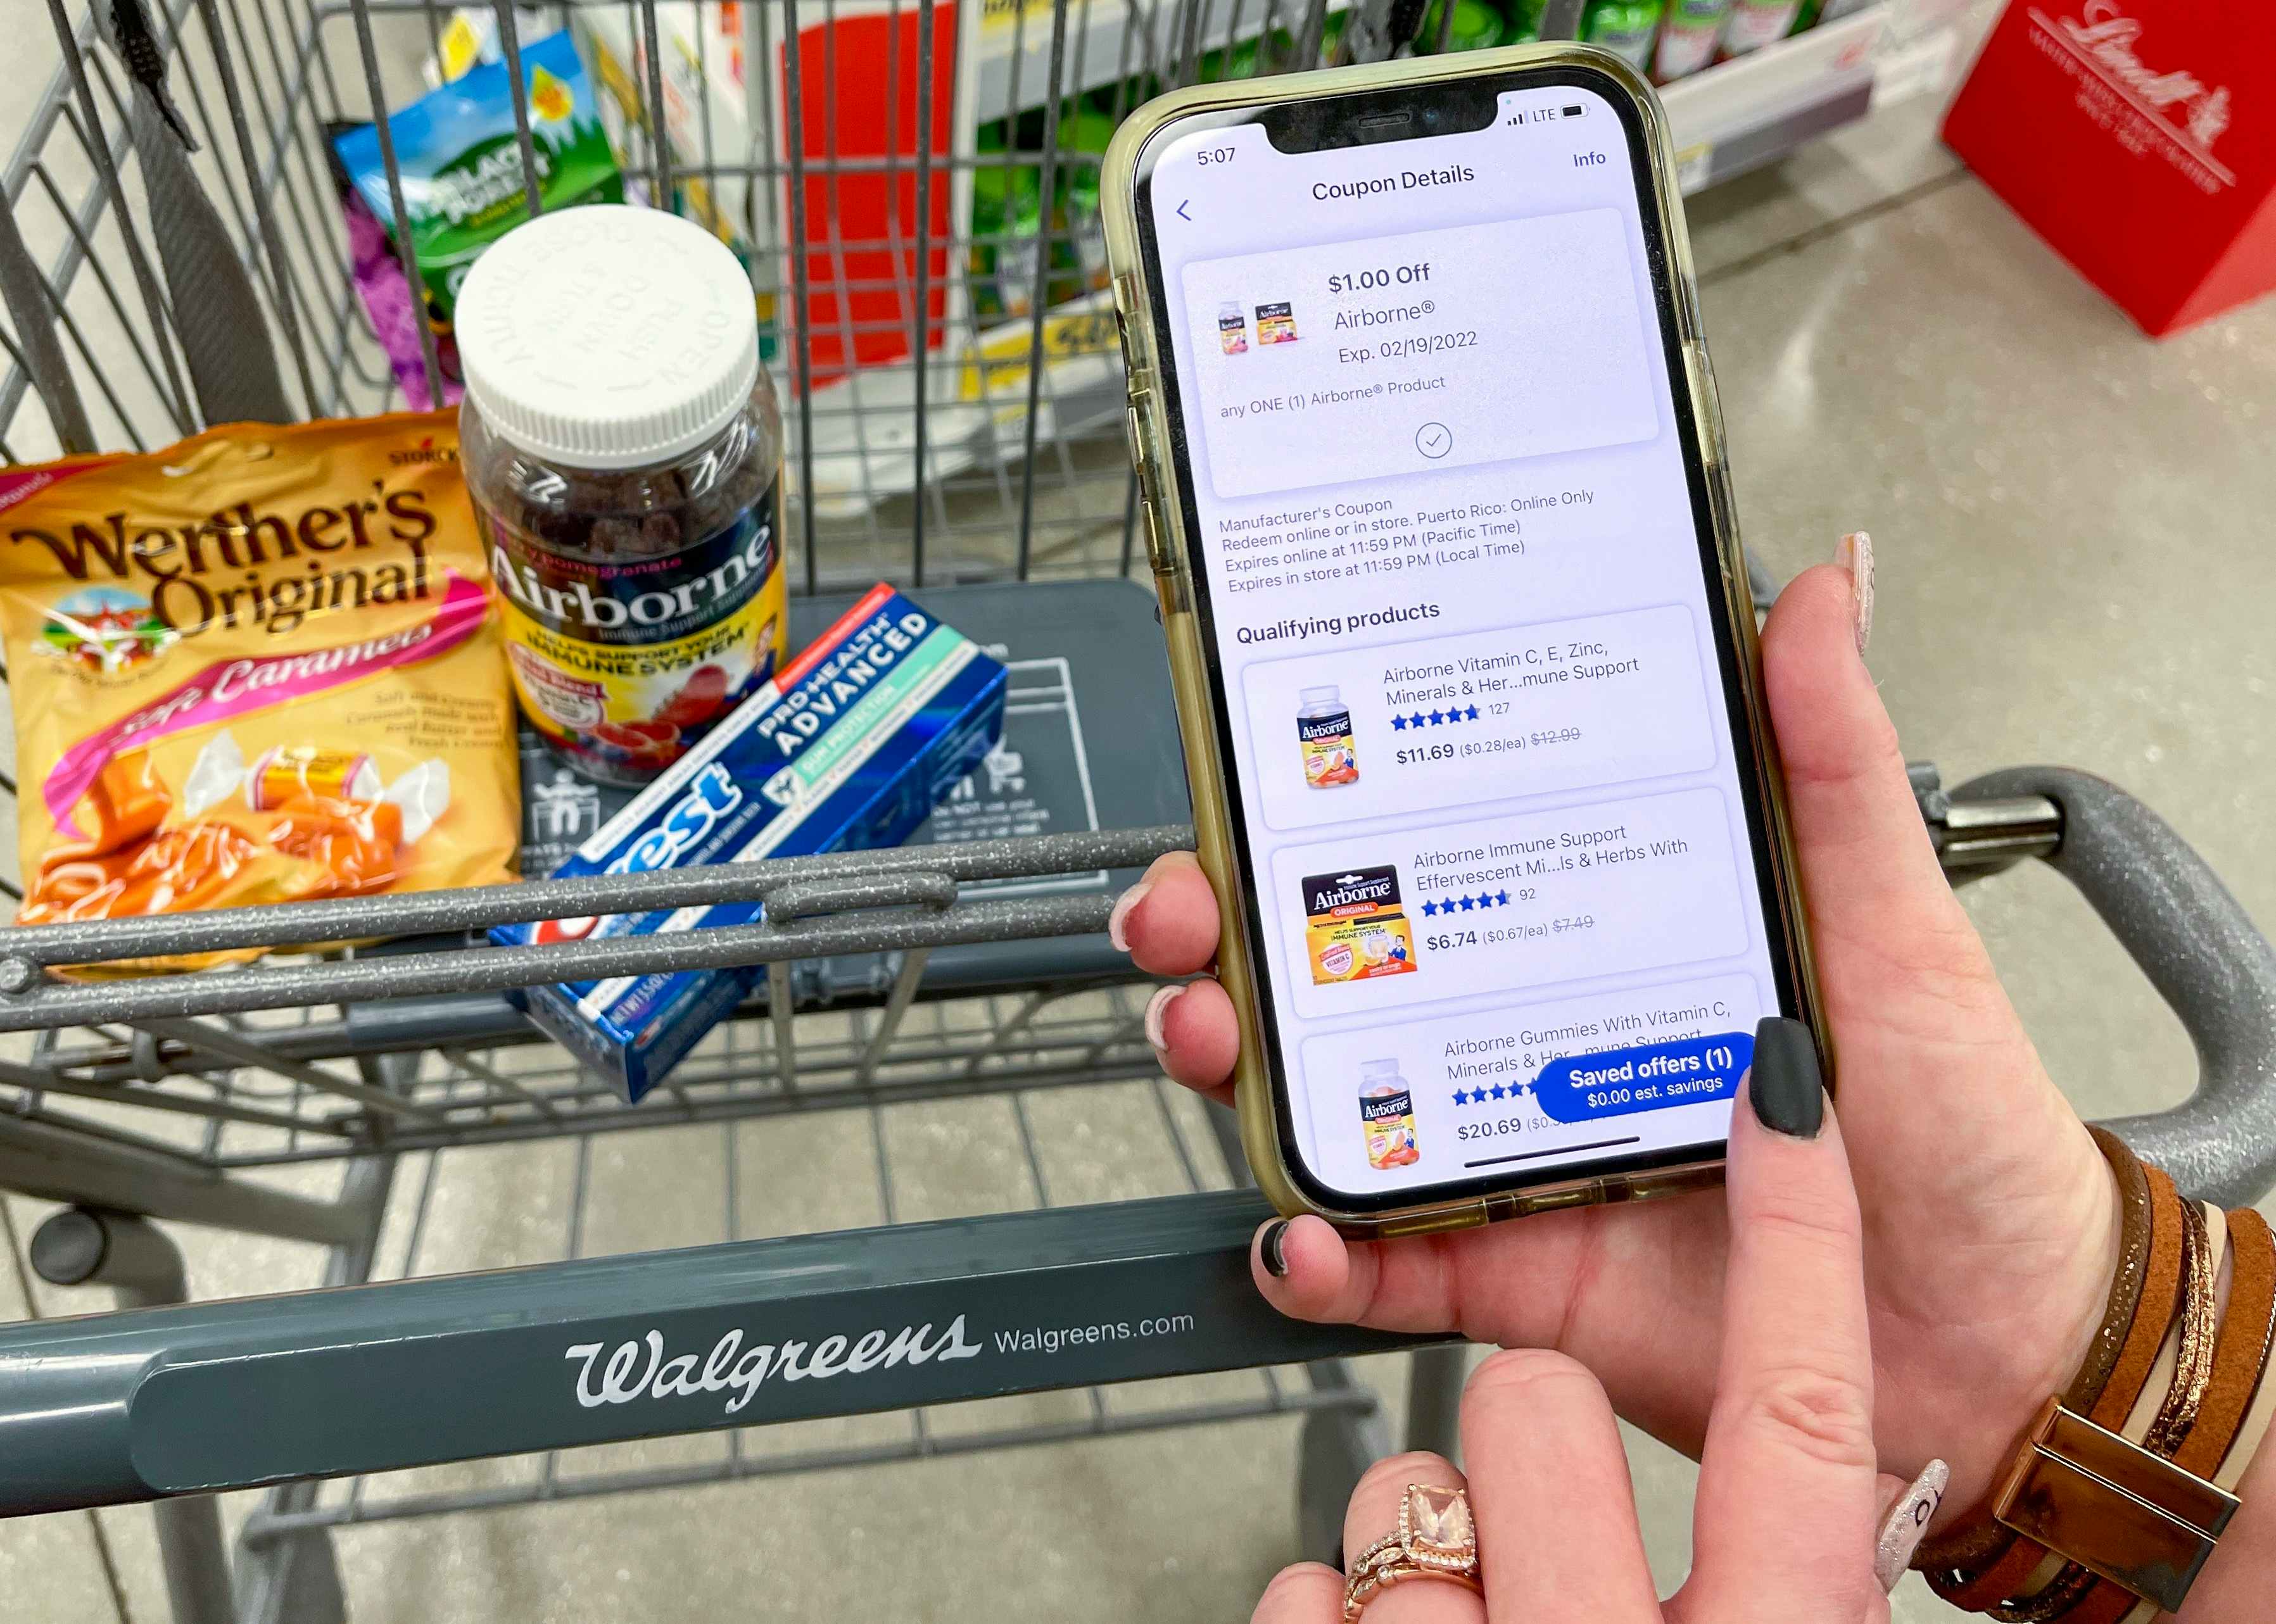 A person looking at coupons on the Walgreens app.